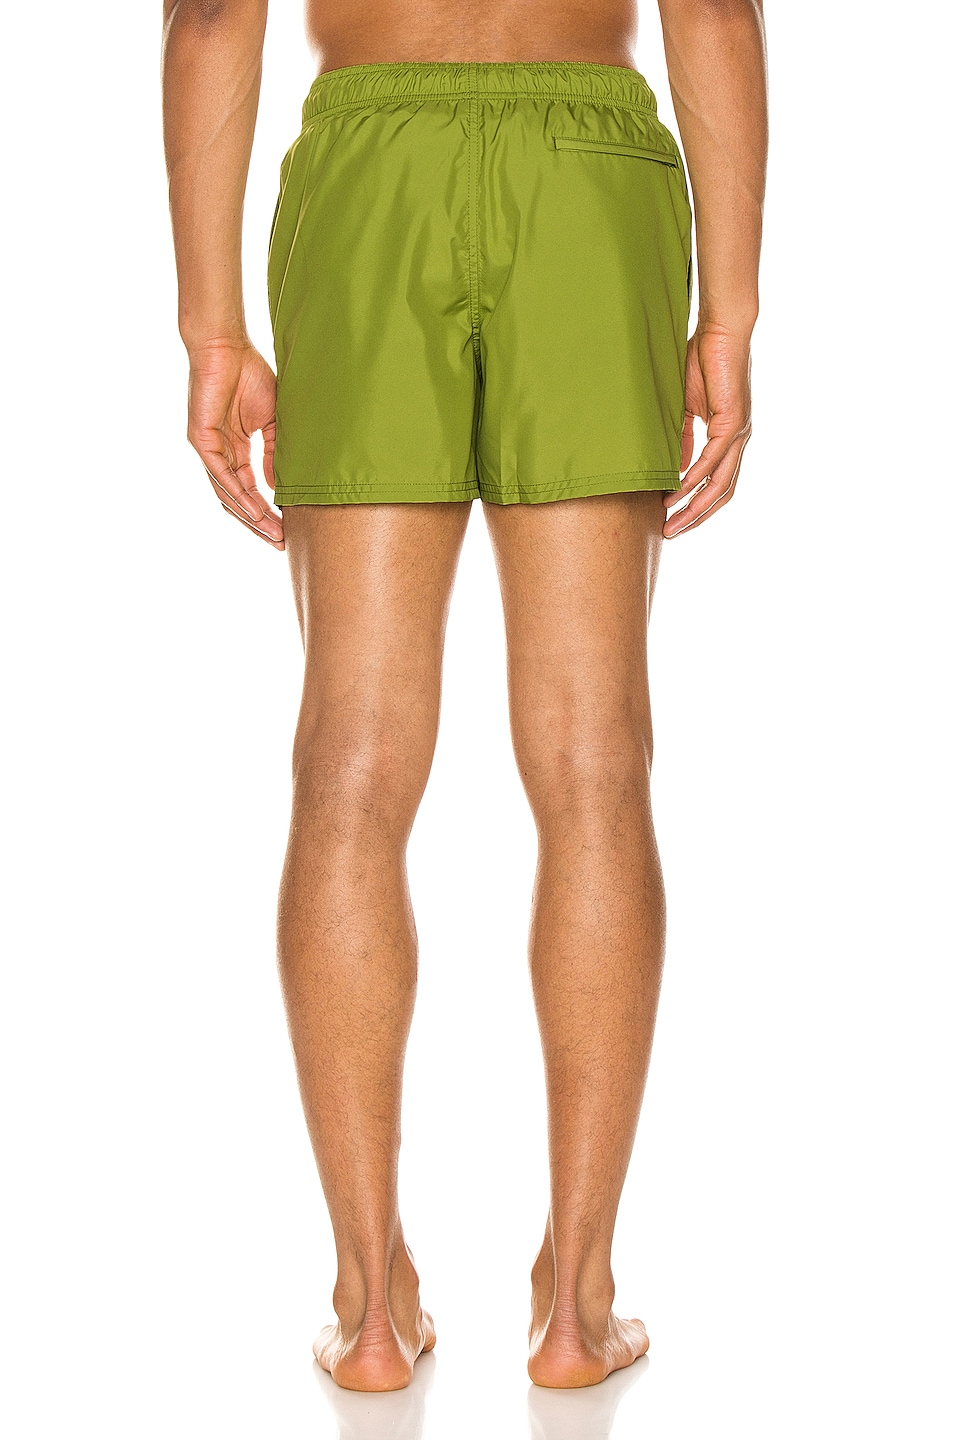 Givenchy Technical Swim Trunks in Olive Green | FWRD